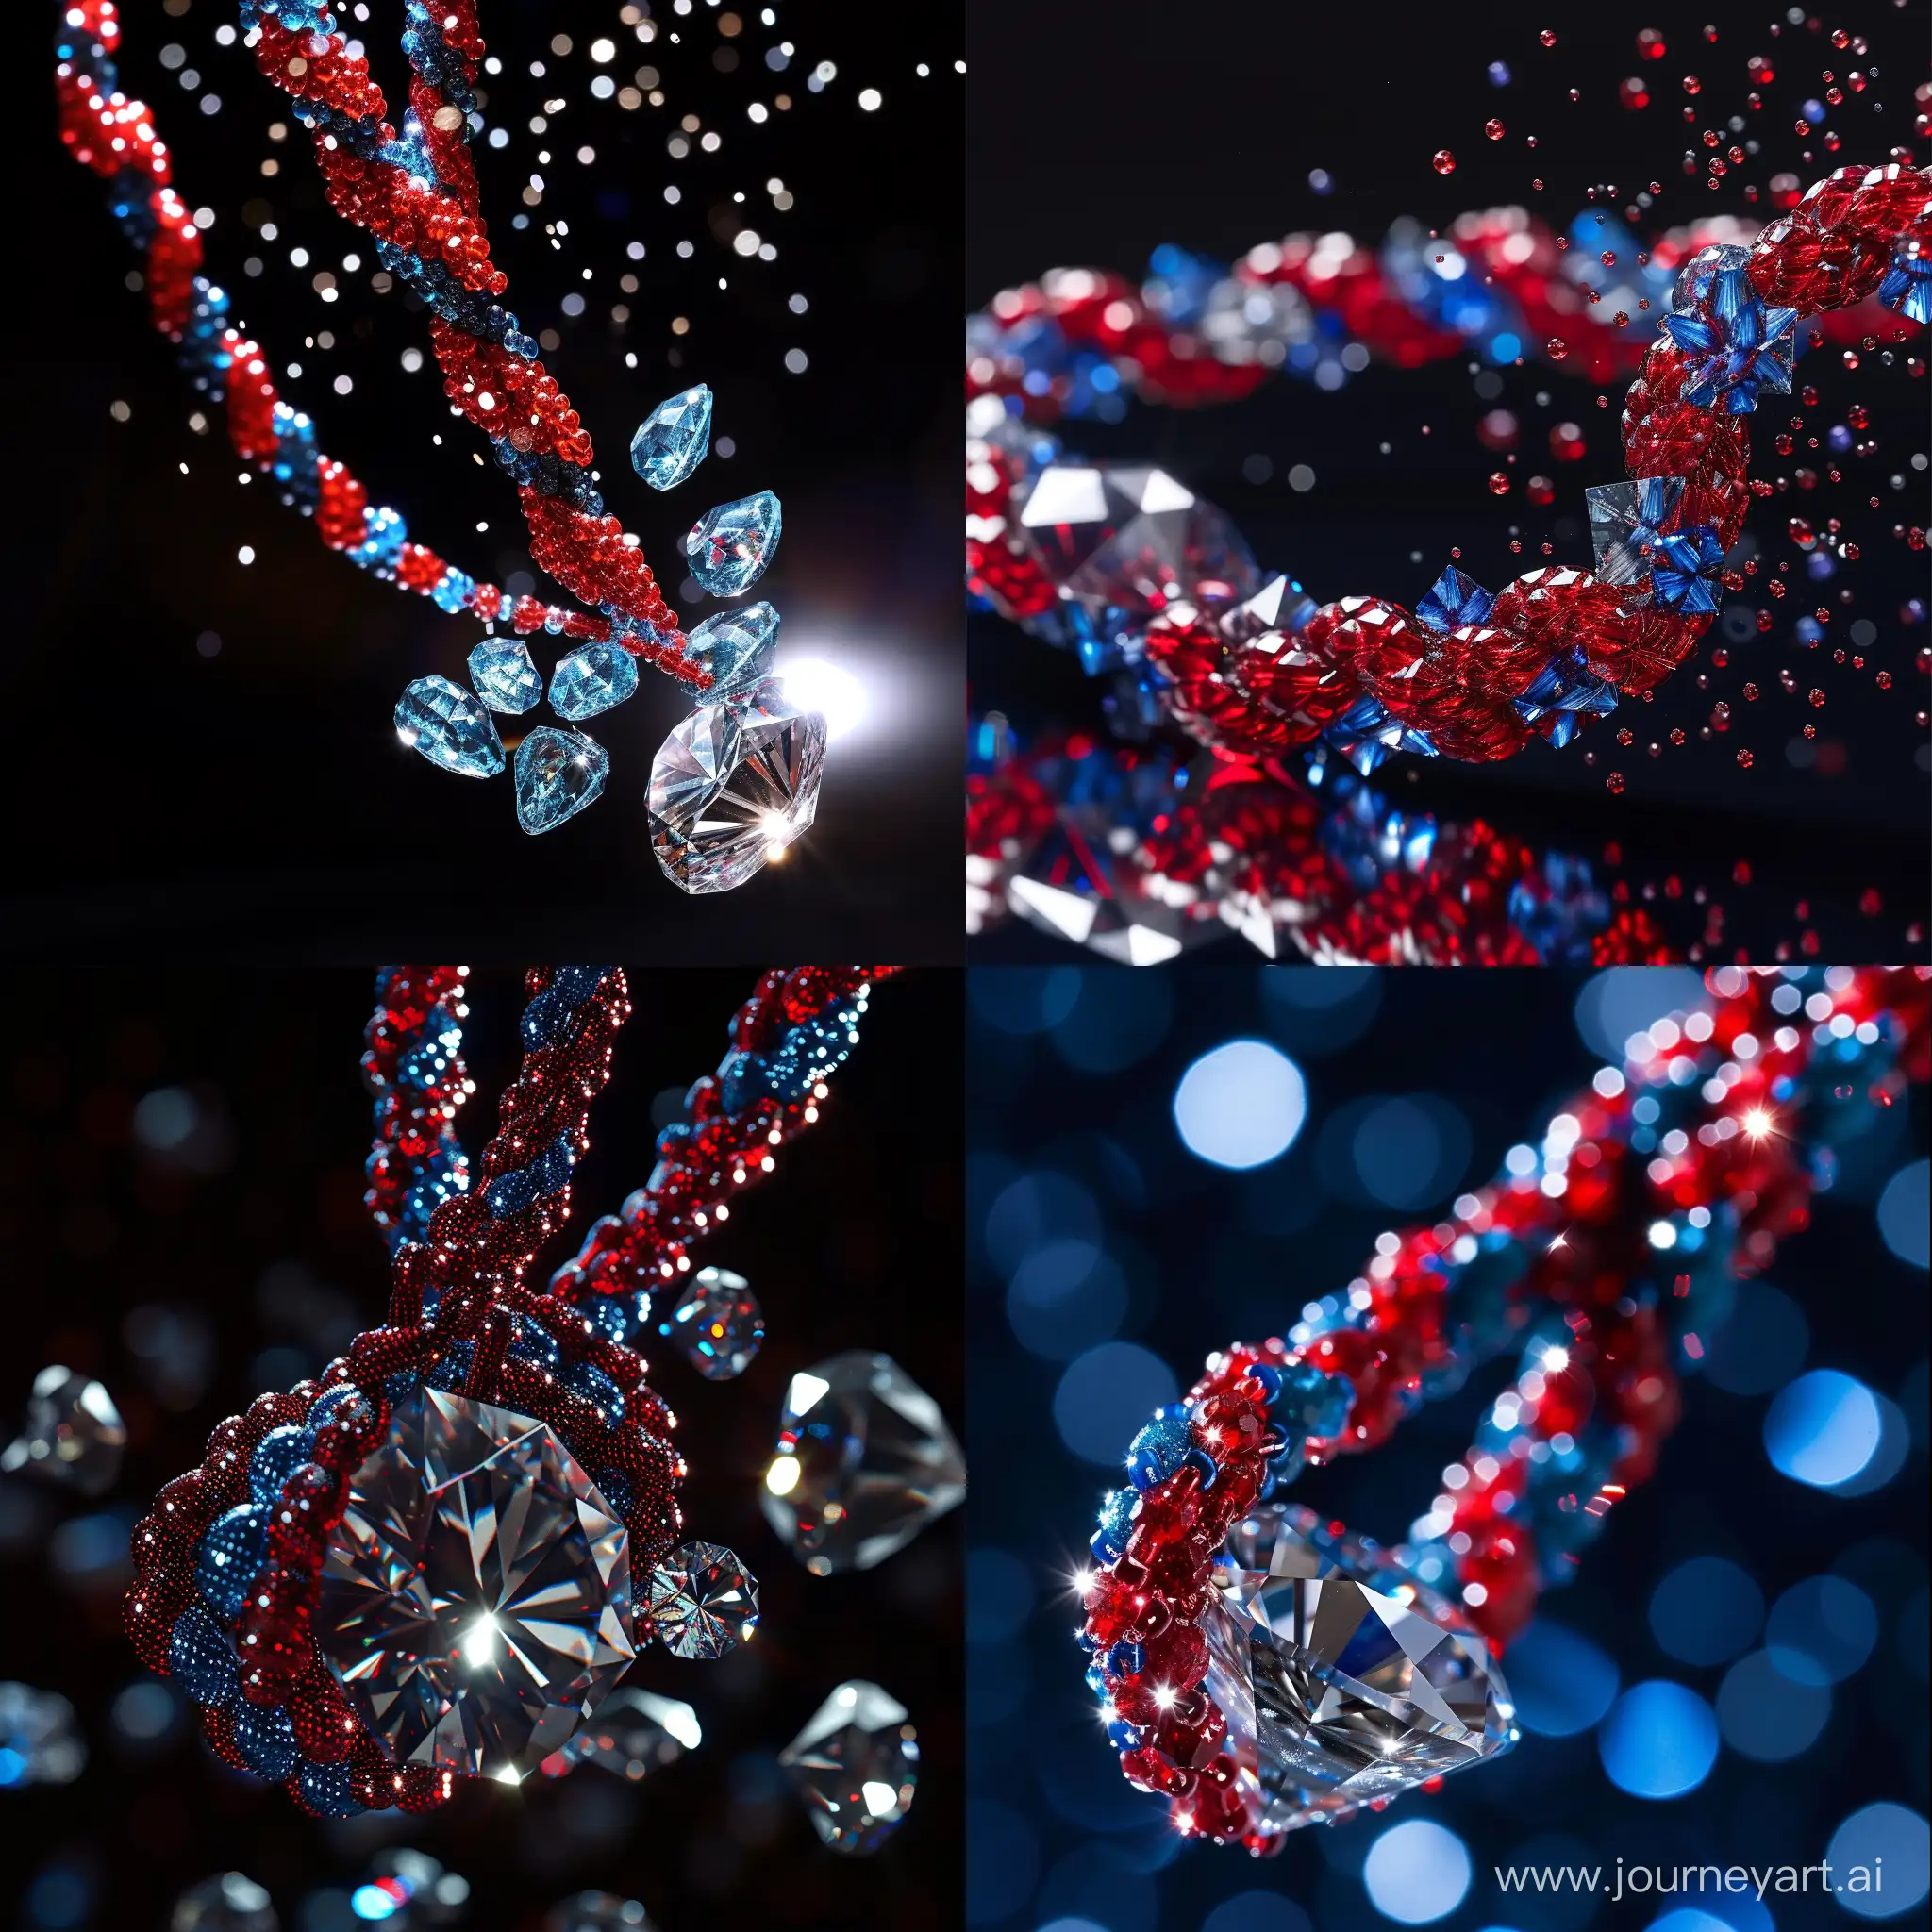 Exquisite-Diamond-Transformation-into-a-Vibrant-Red-and-Blue-Beaded-Braided-Bag